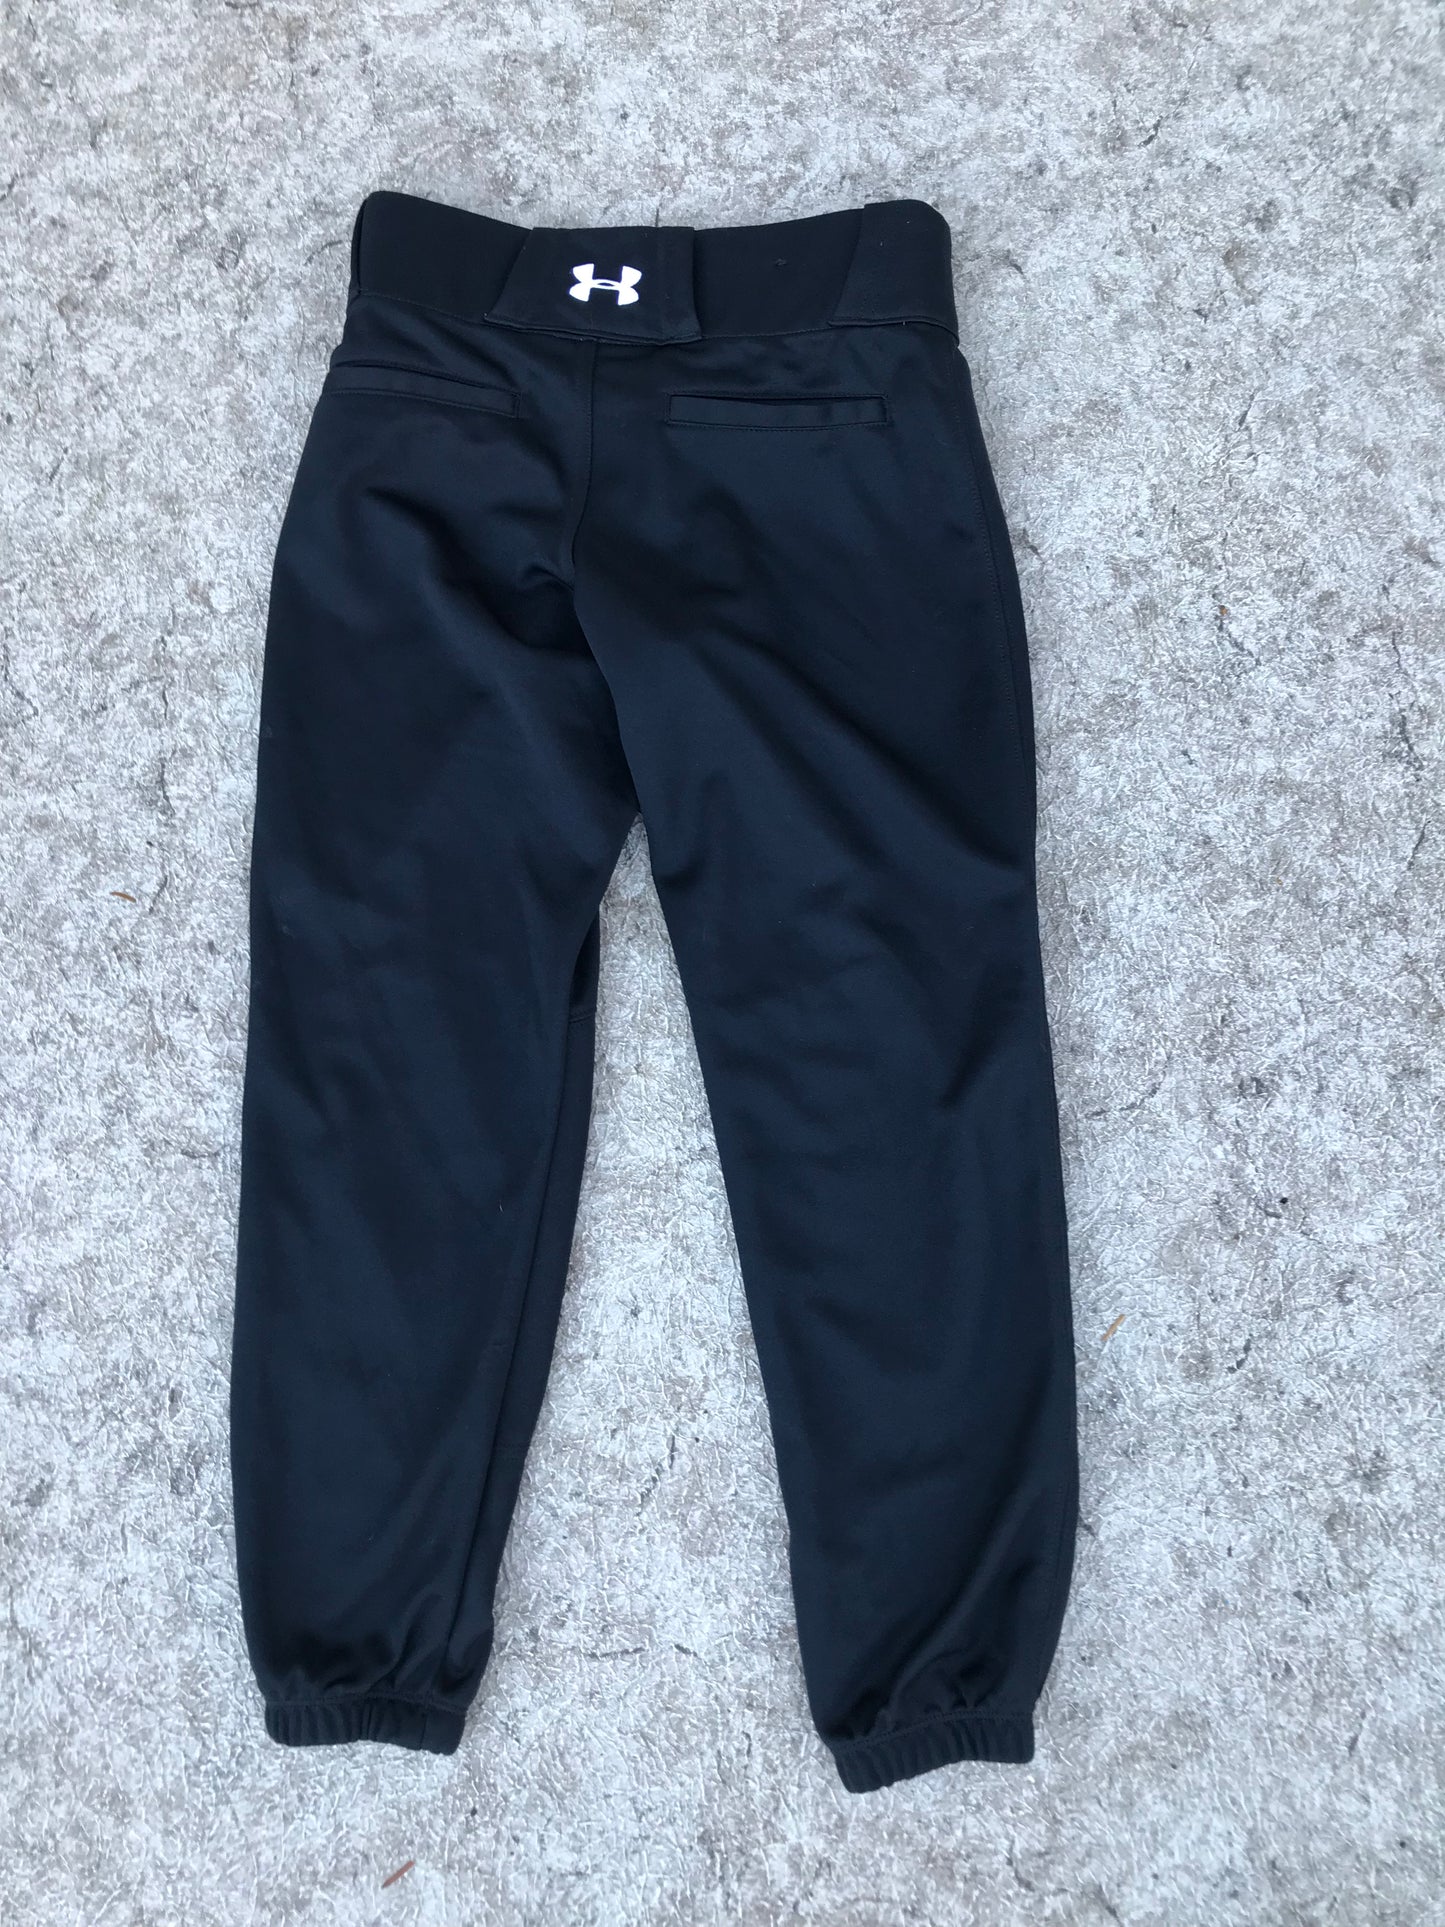 Baseball Pants Child Size Youth Small Under Armour Black As New